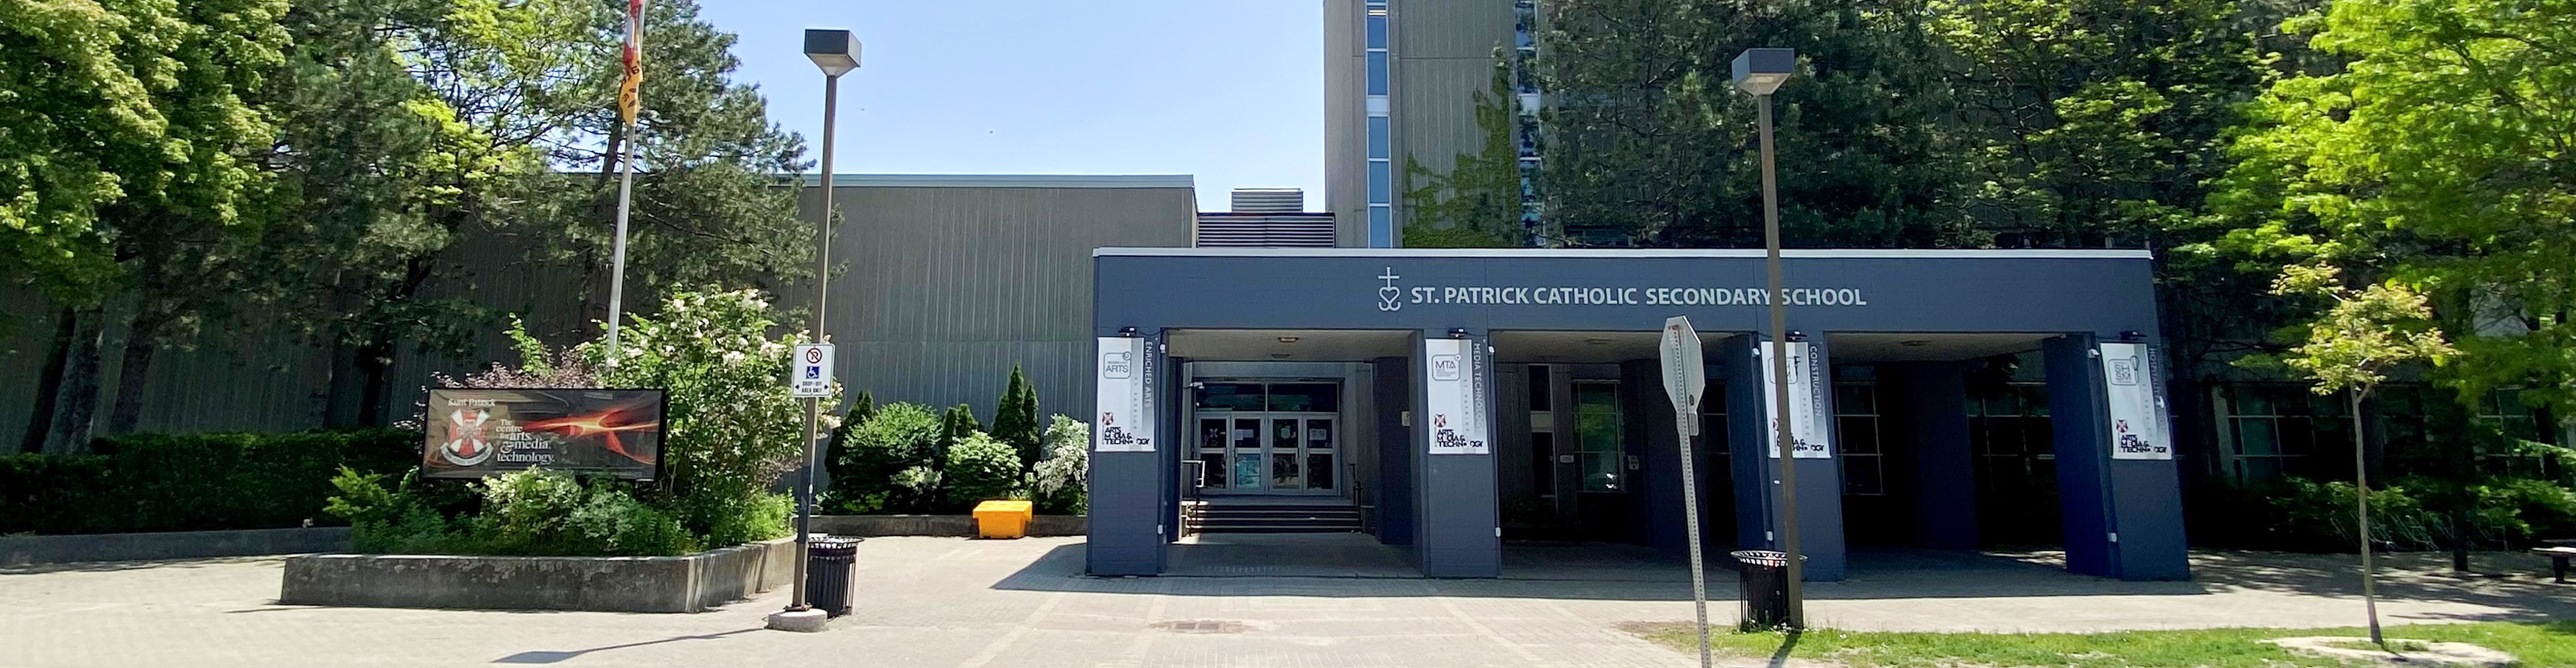 The front of the St. Patrick Catholic Secondary School building